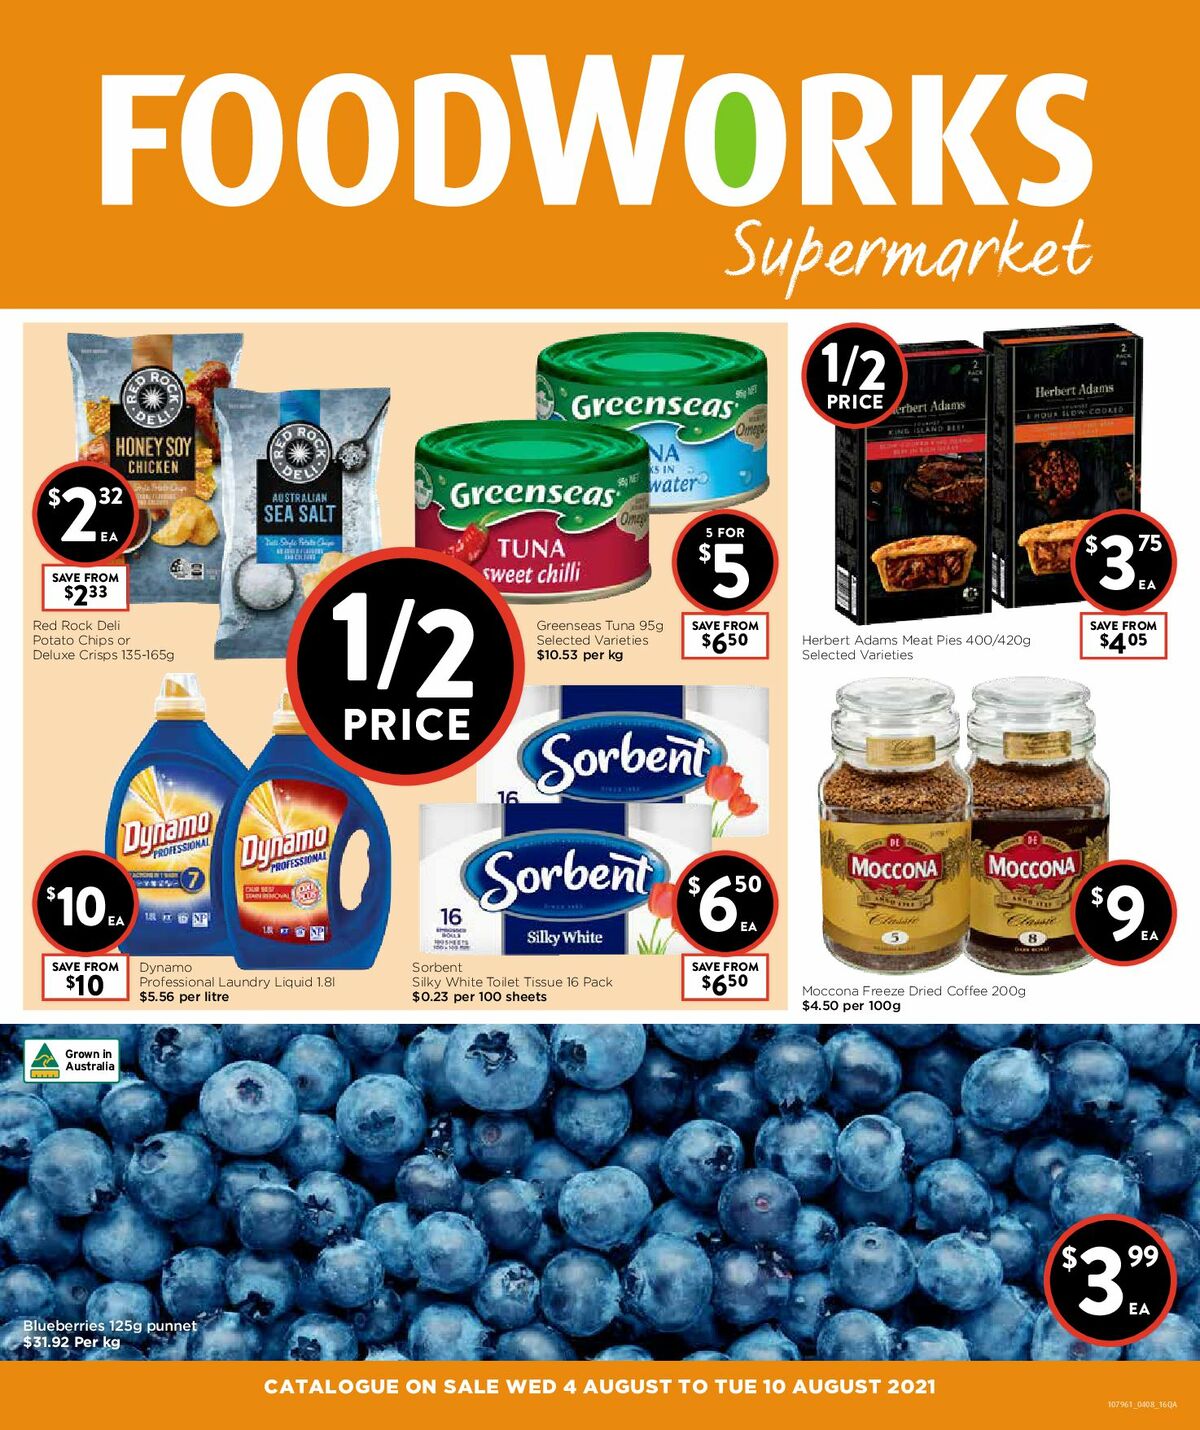 FoodWorks Supermarket Catalogues from 4 August